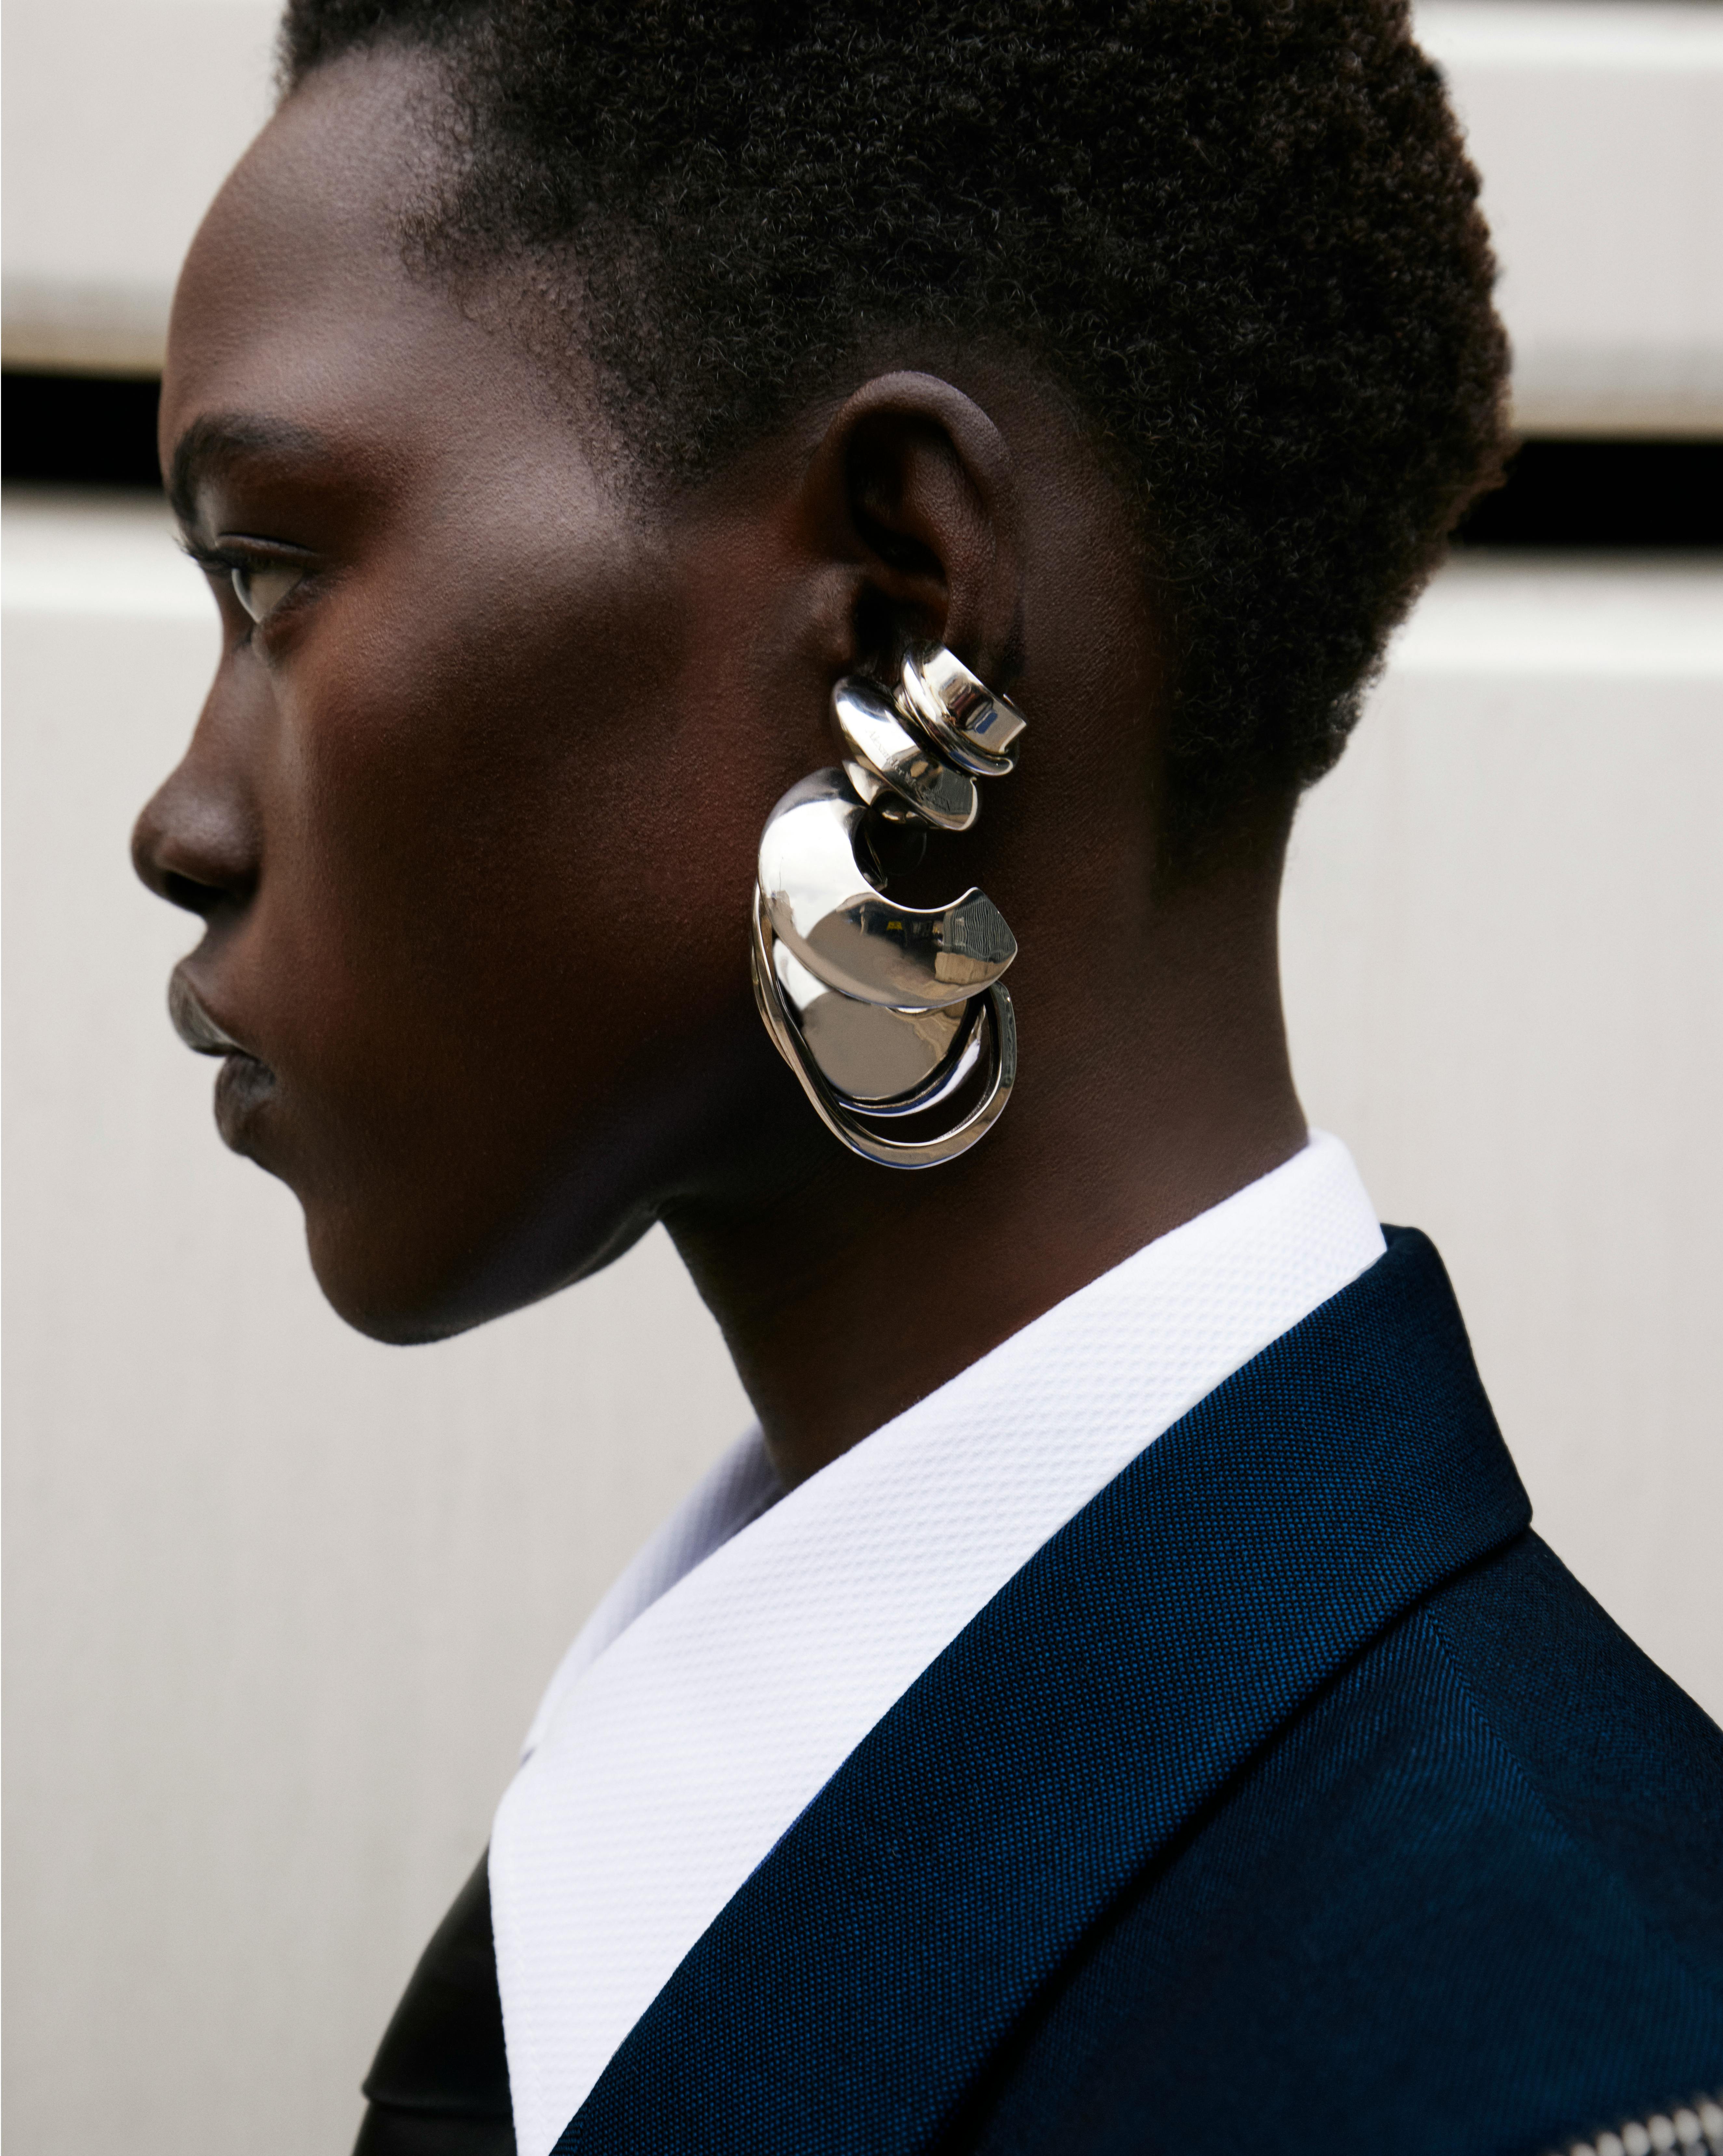 Ear Cuff Lovers: the holeless earrings loved by the fashion system